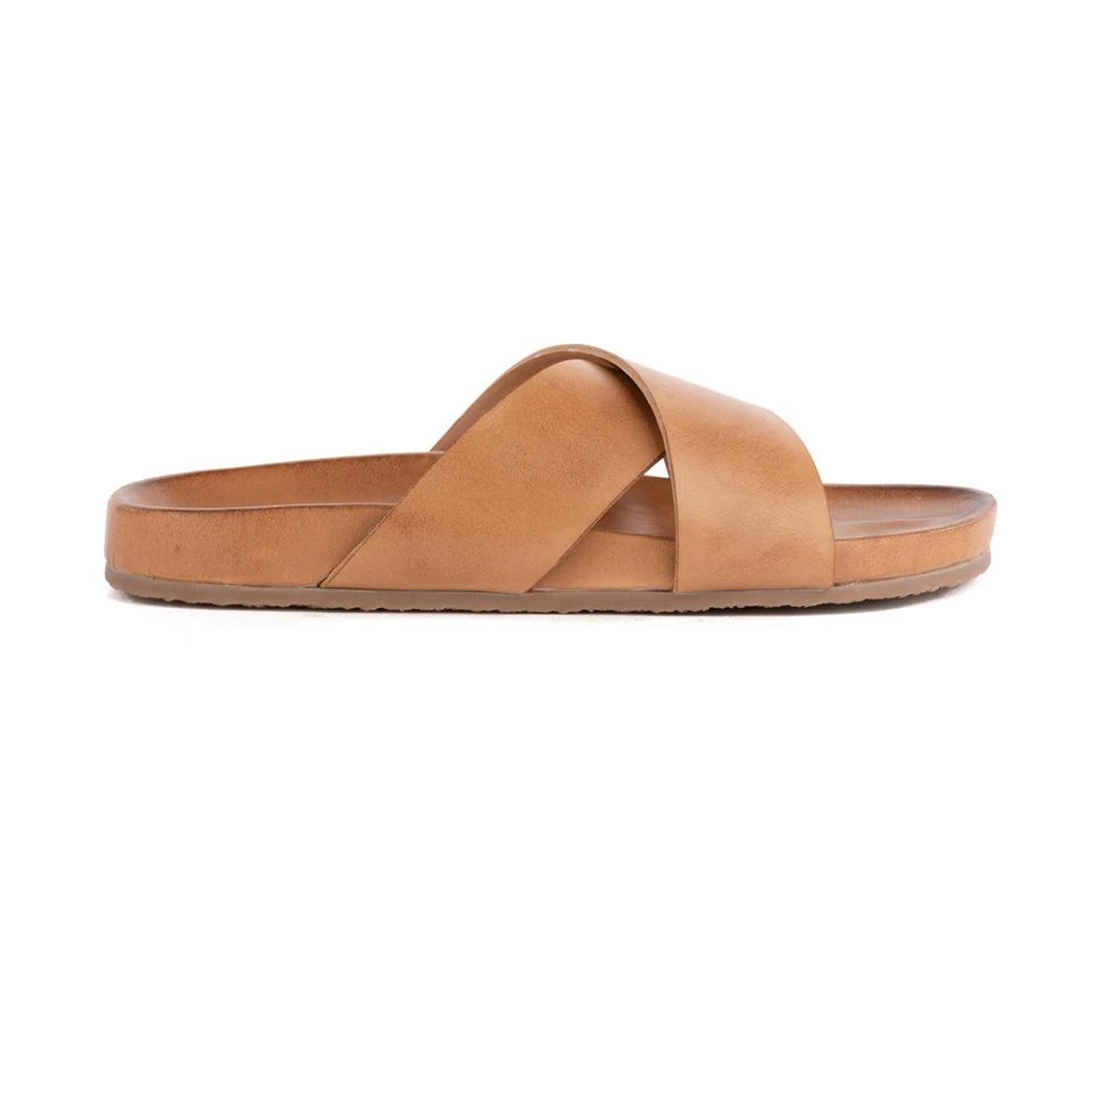 seychelles lighthearted slide in tan leather 84717